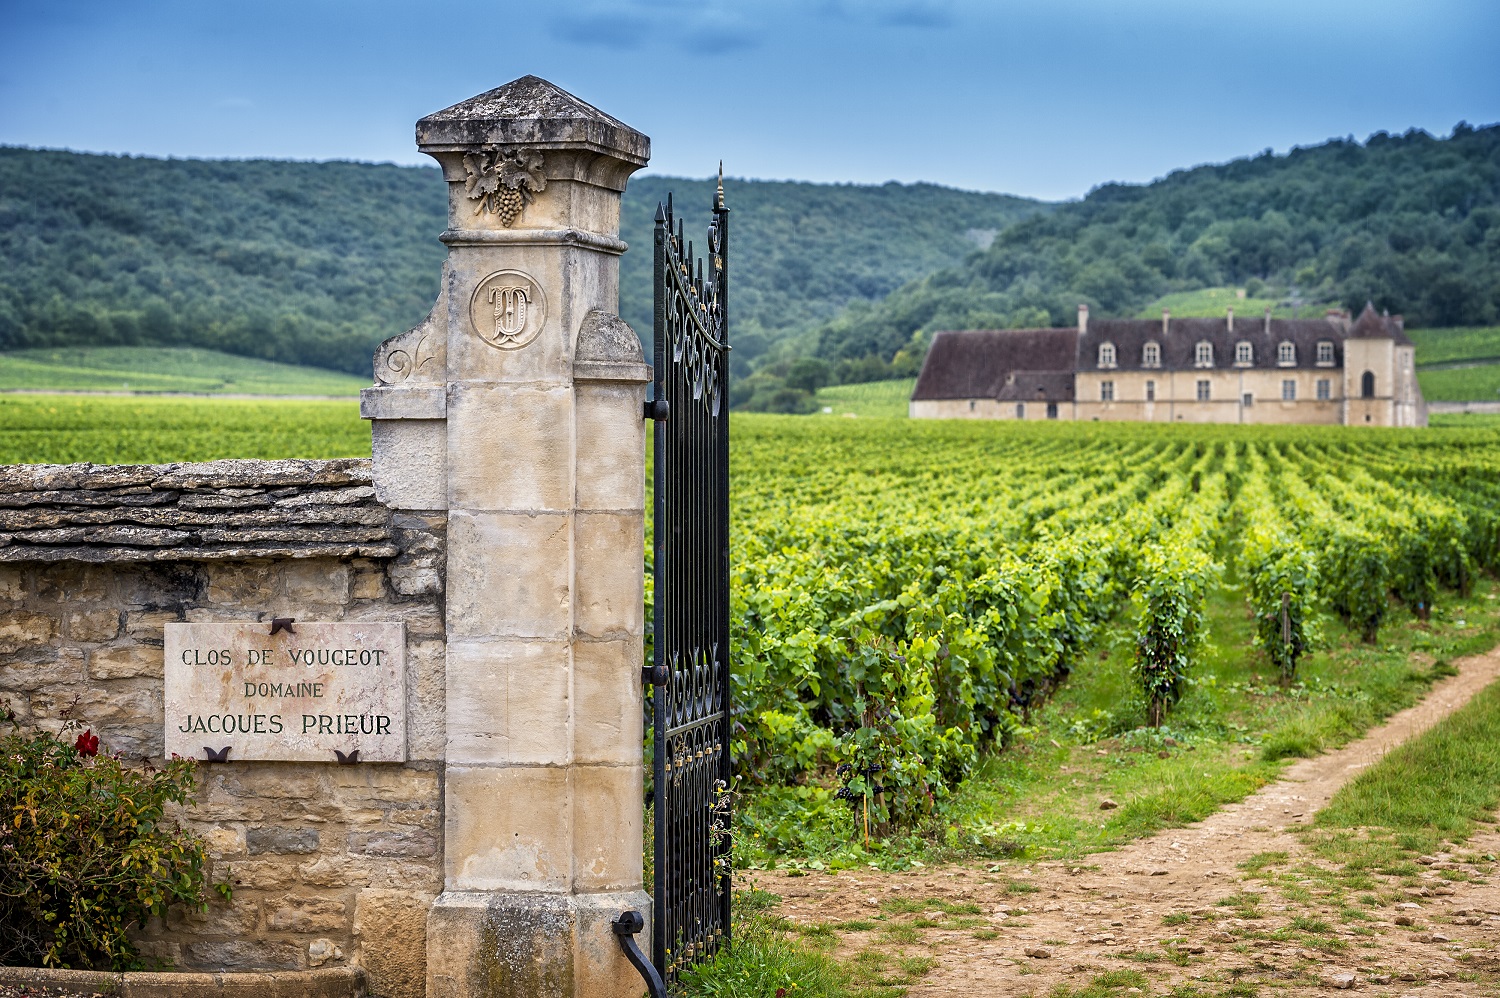 The red and white wines of Burgundy are considered some of the world's greatest Pinot Noir and Chardonnay